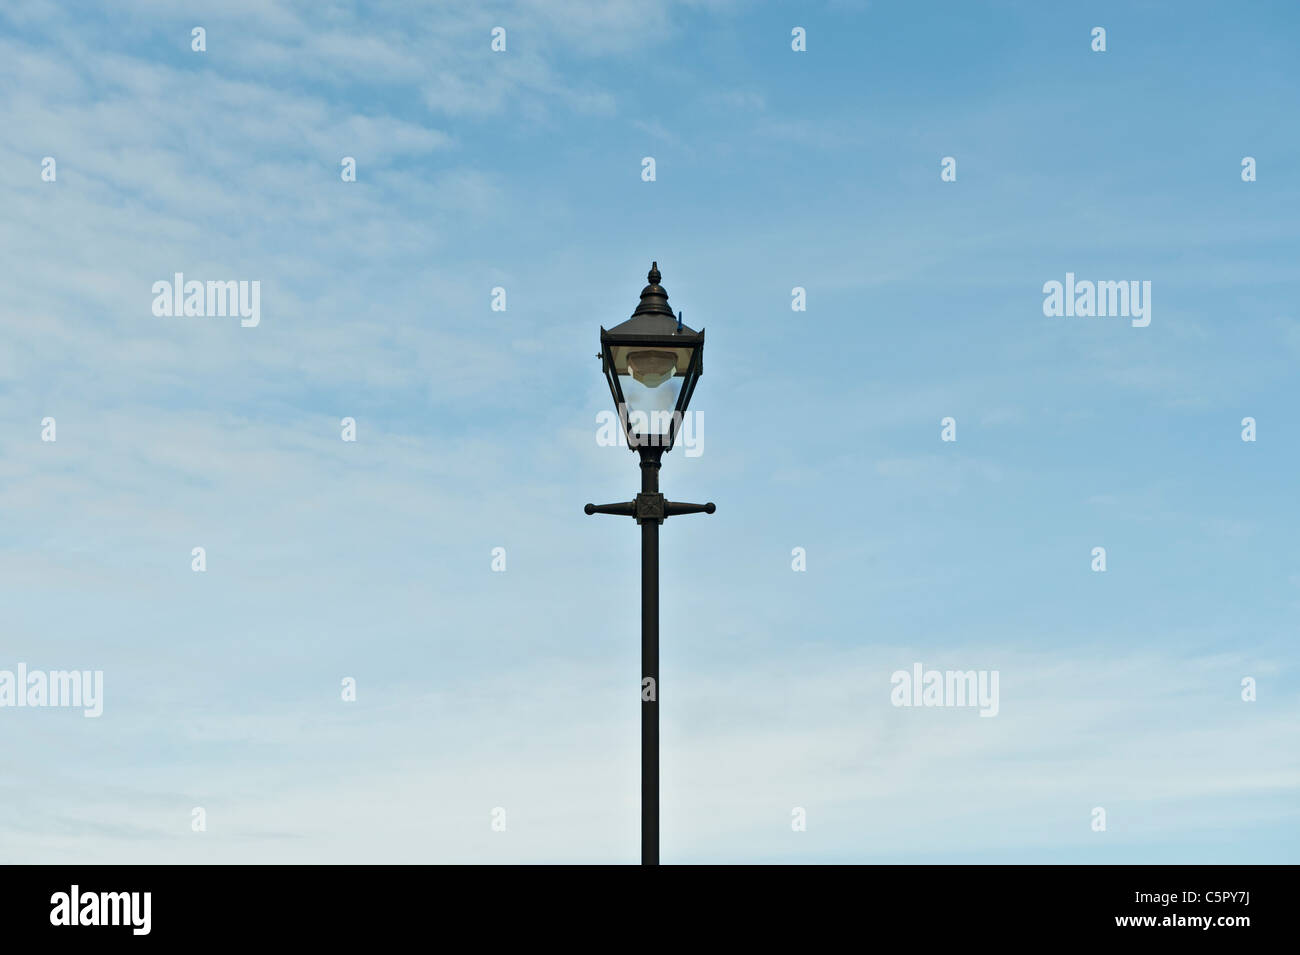 A traditional british lamppost against an almost clear sky backdrop in St Ives, Cornwall. Stock Photo